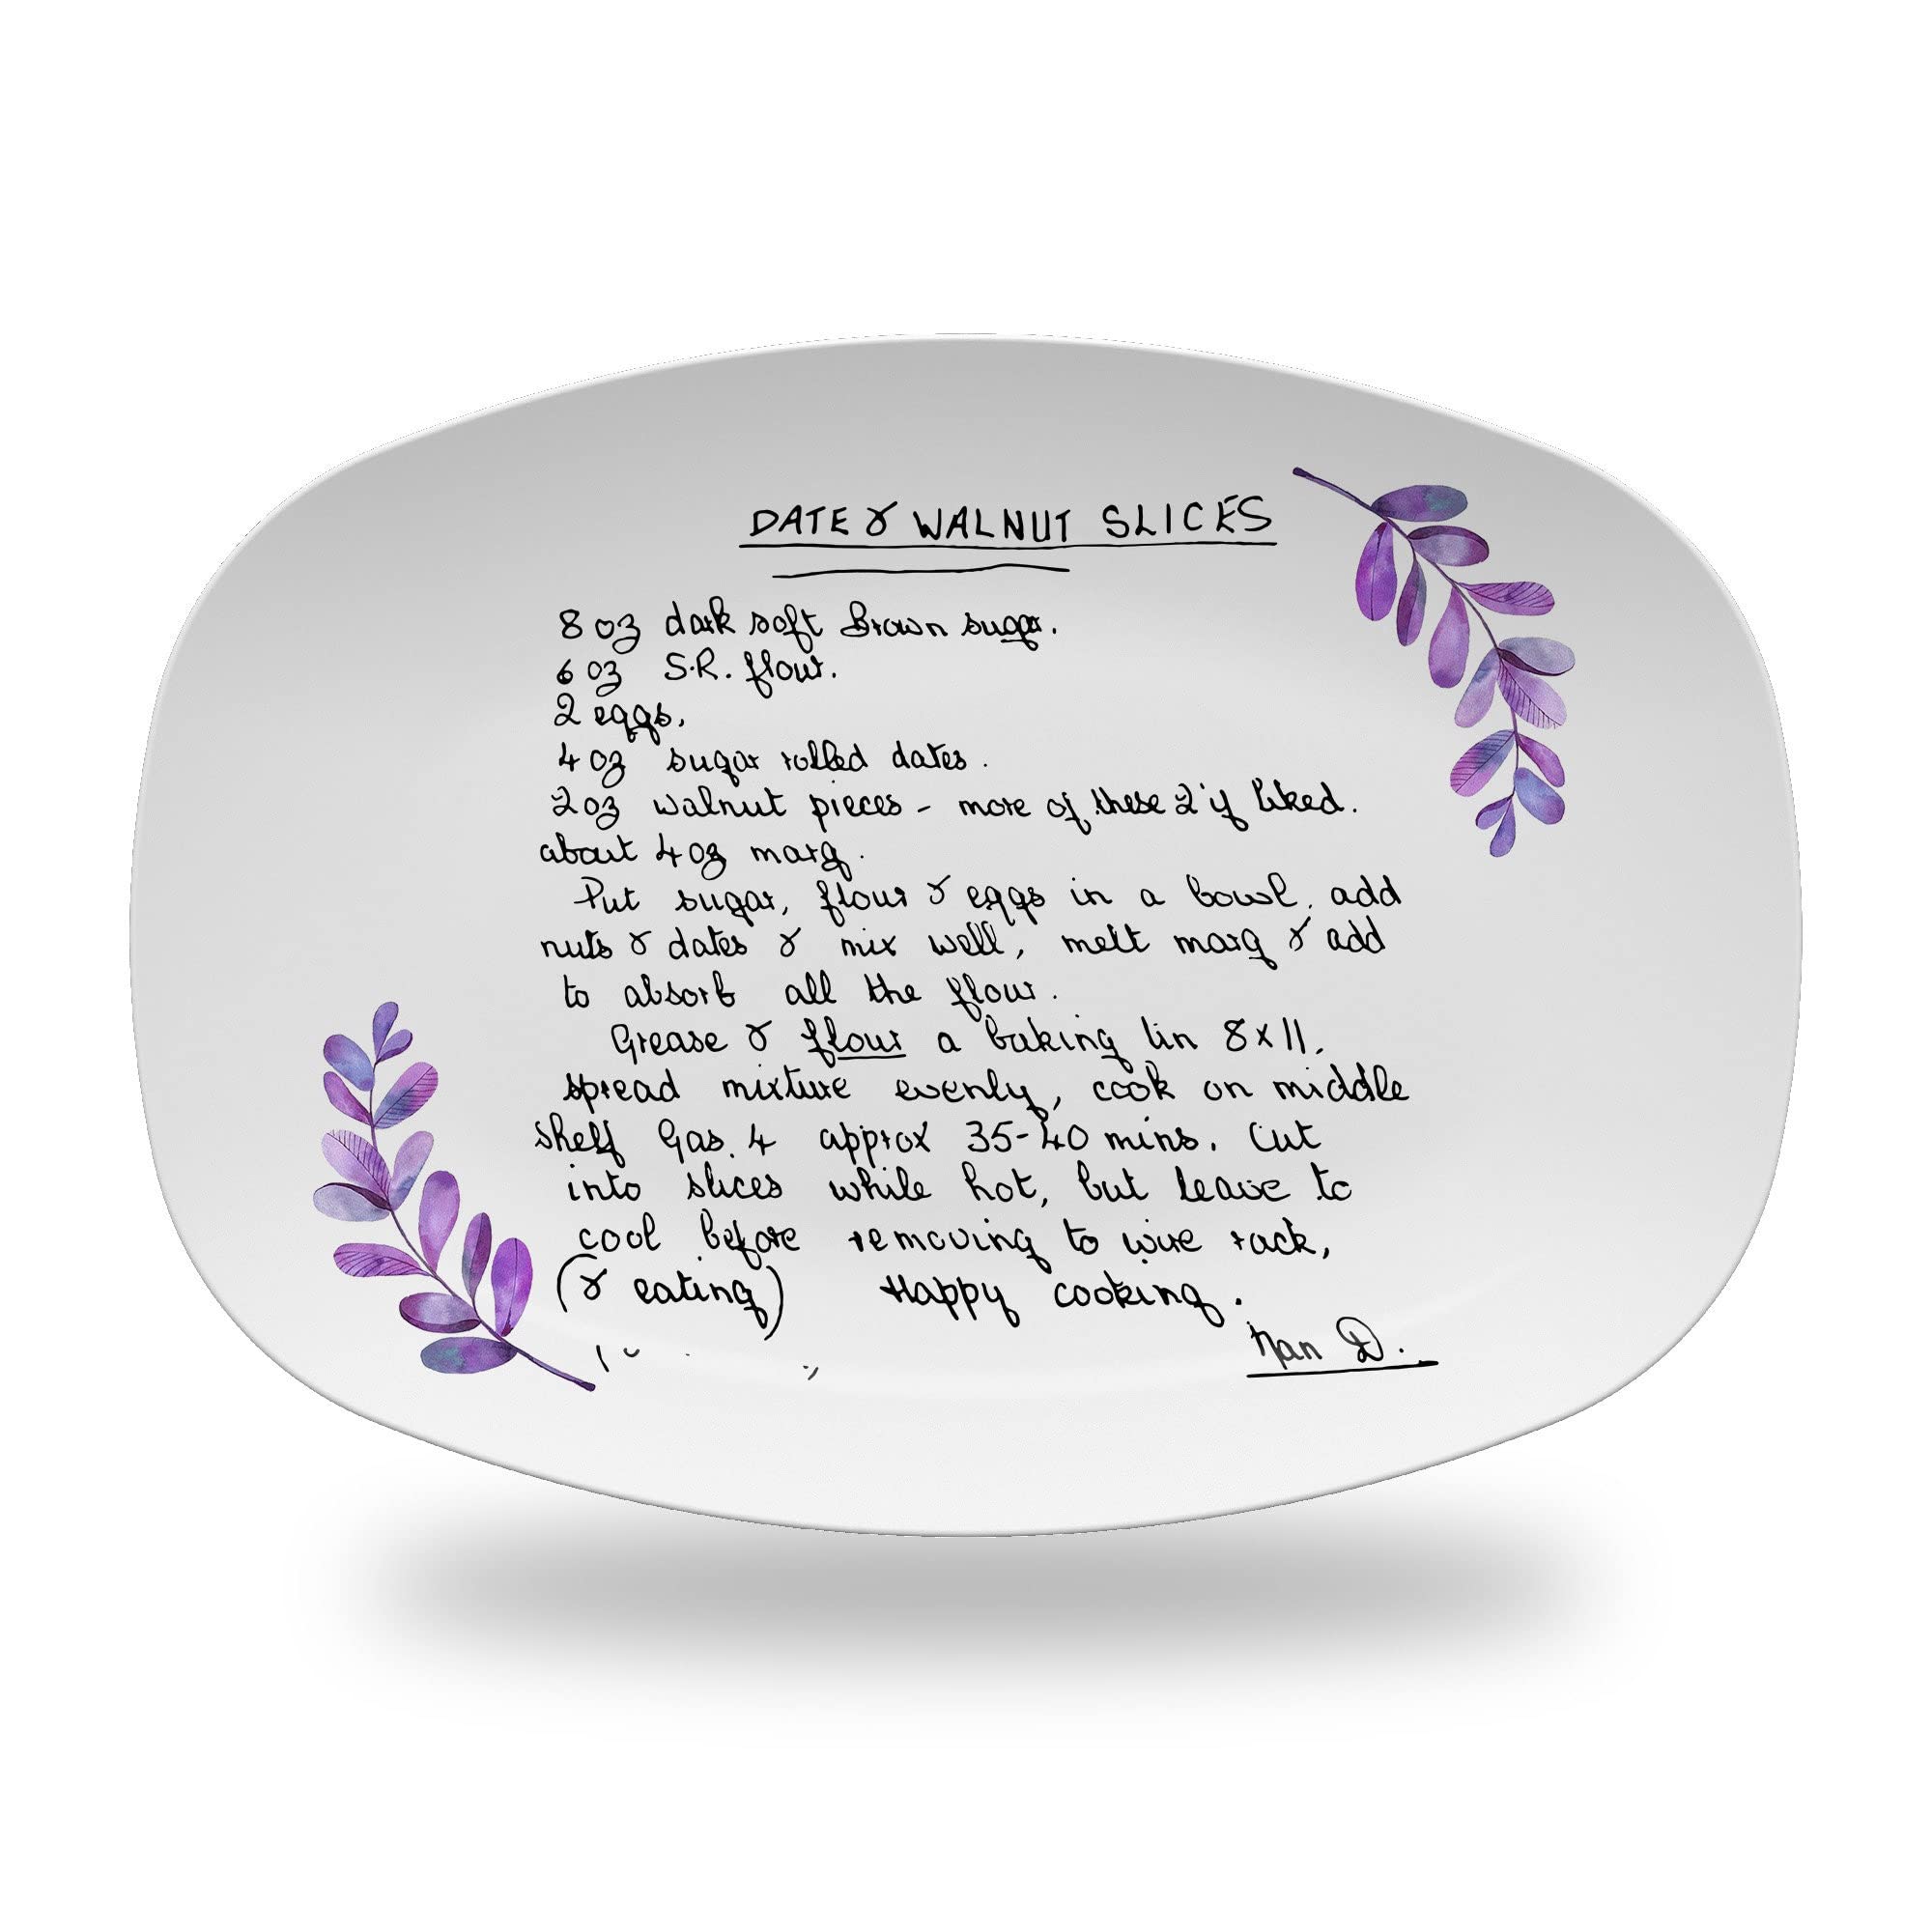 Handwritten Recipe Personalized Platter Custom Handwriting Recipe Plate Recipe Card Gift for Mom or Grandma Grandparent Day Gift Idea Serving Tray Serving Plate for Fish Dish